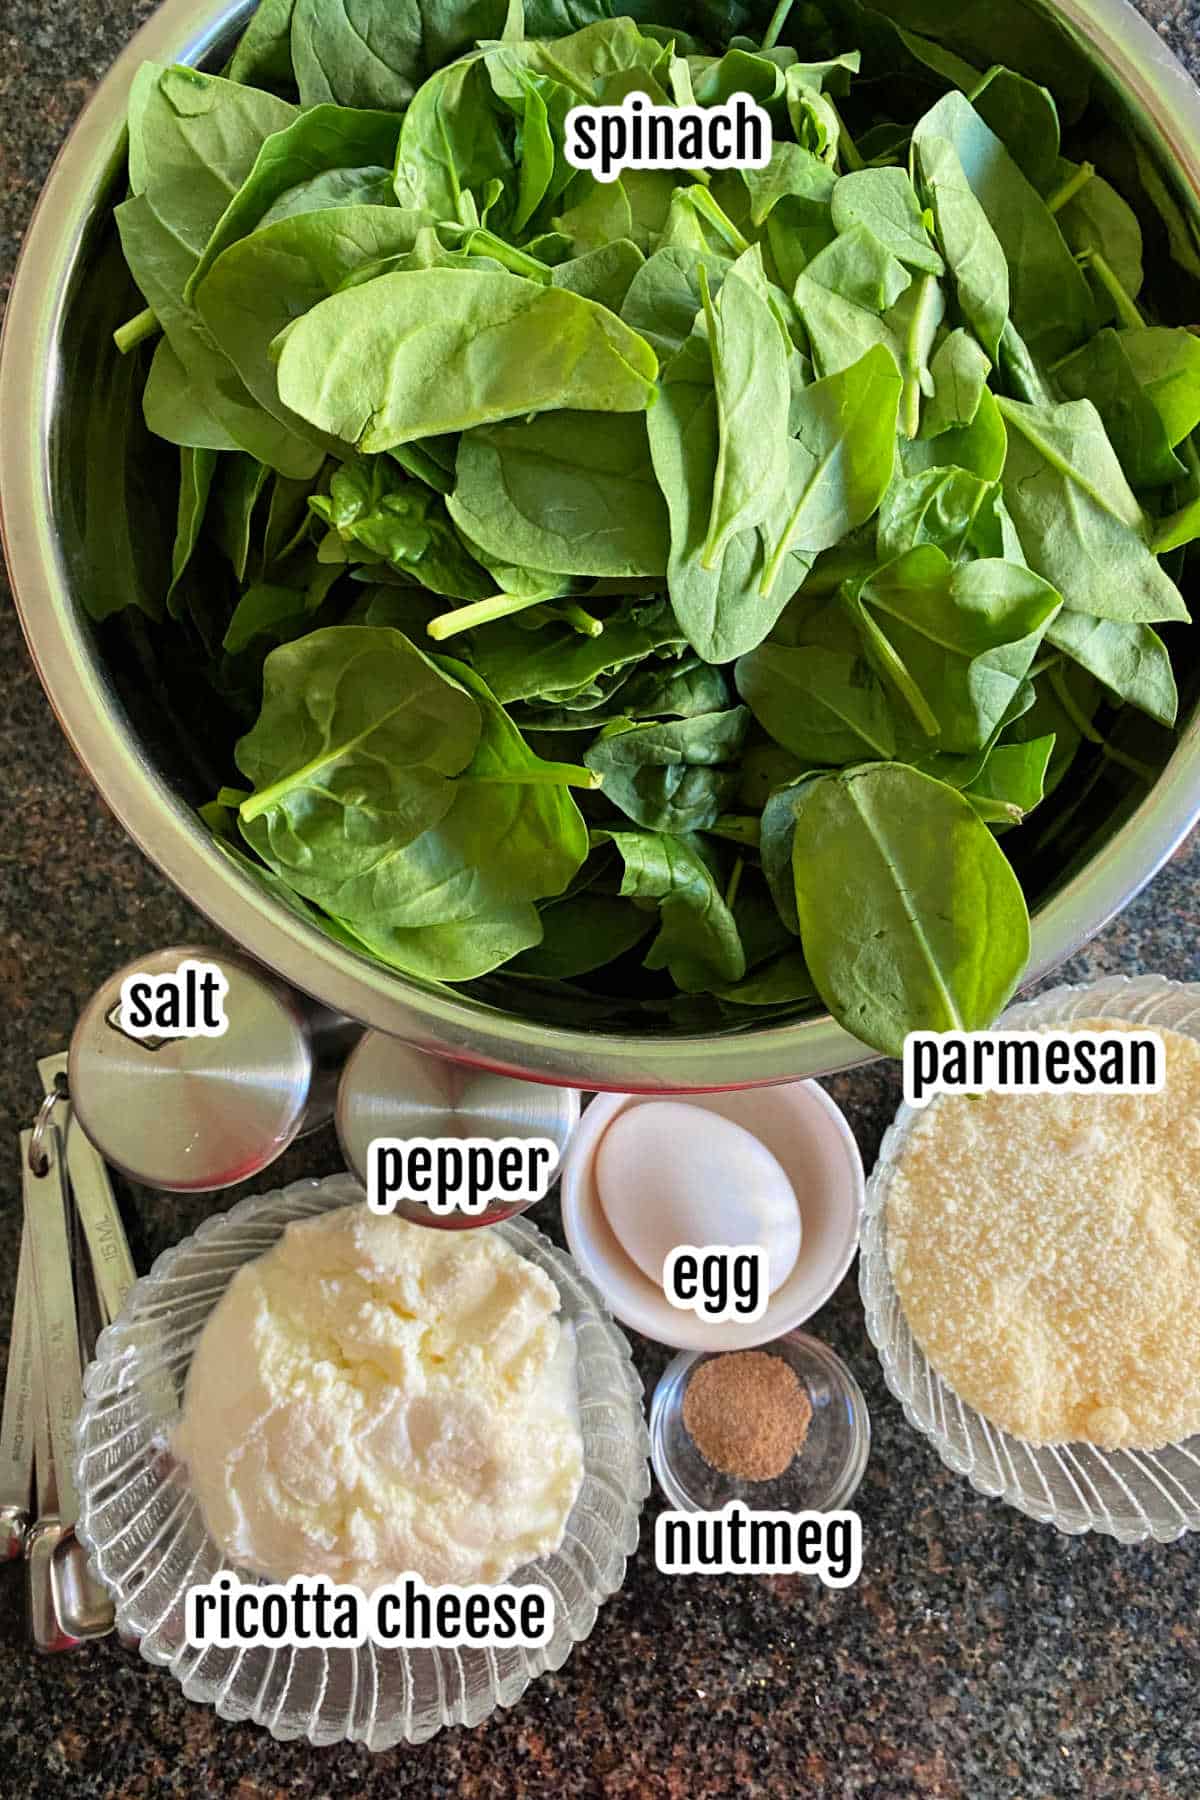 Image of the ingredients needed to make the spinach ricotta filling. 